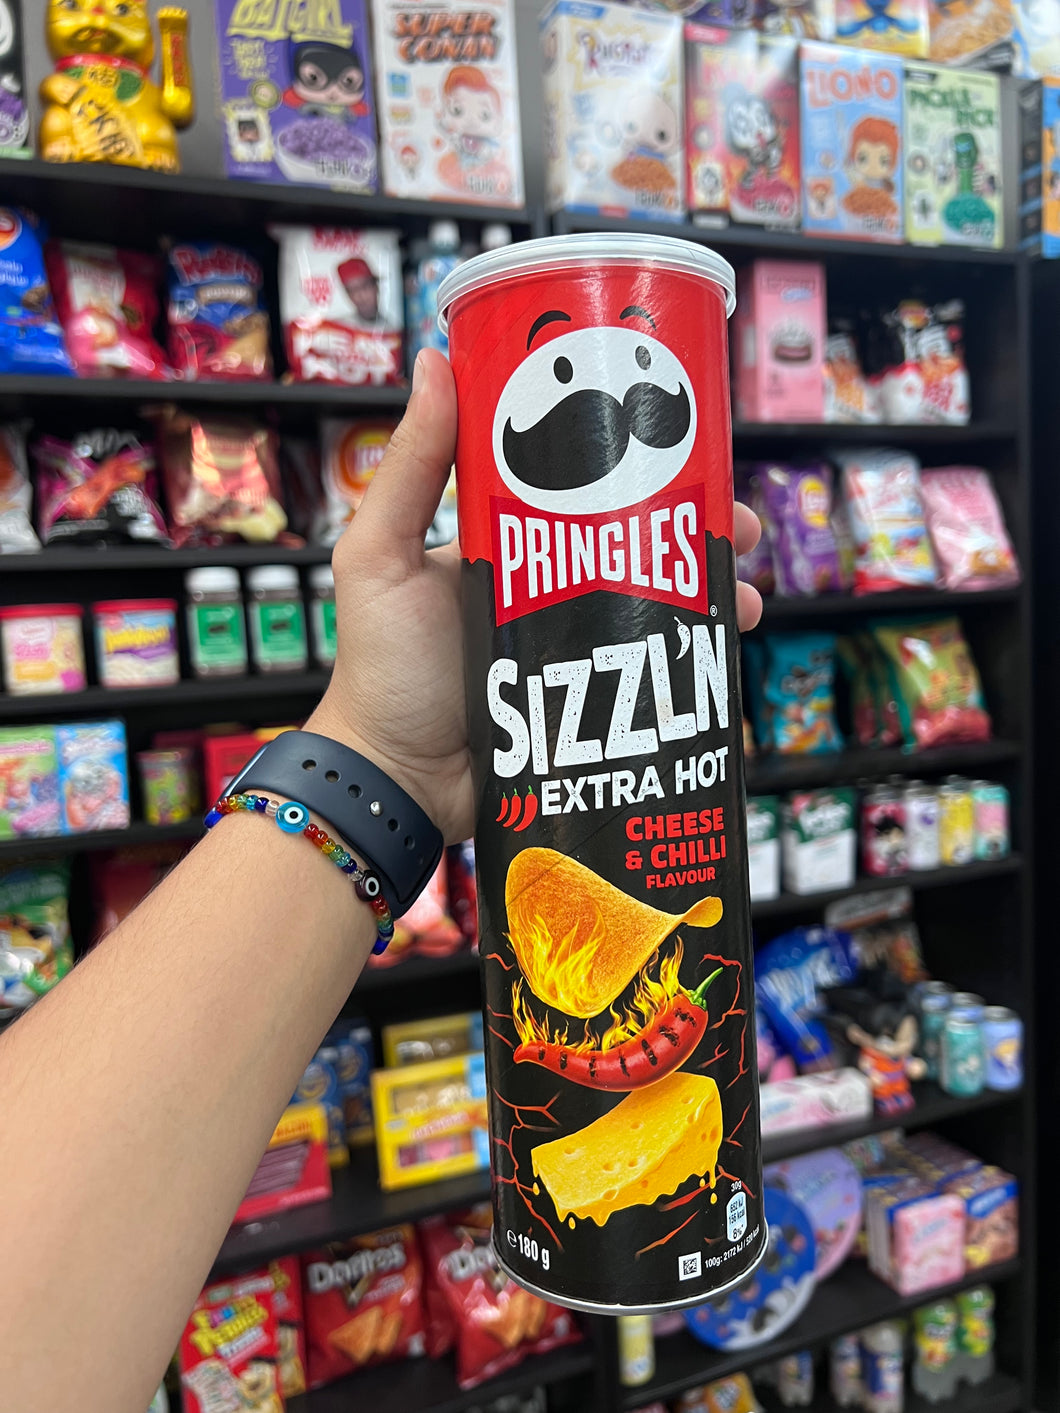 Pringles Sizzling Extra Hot Chili and Cheese  (UK)